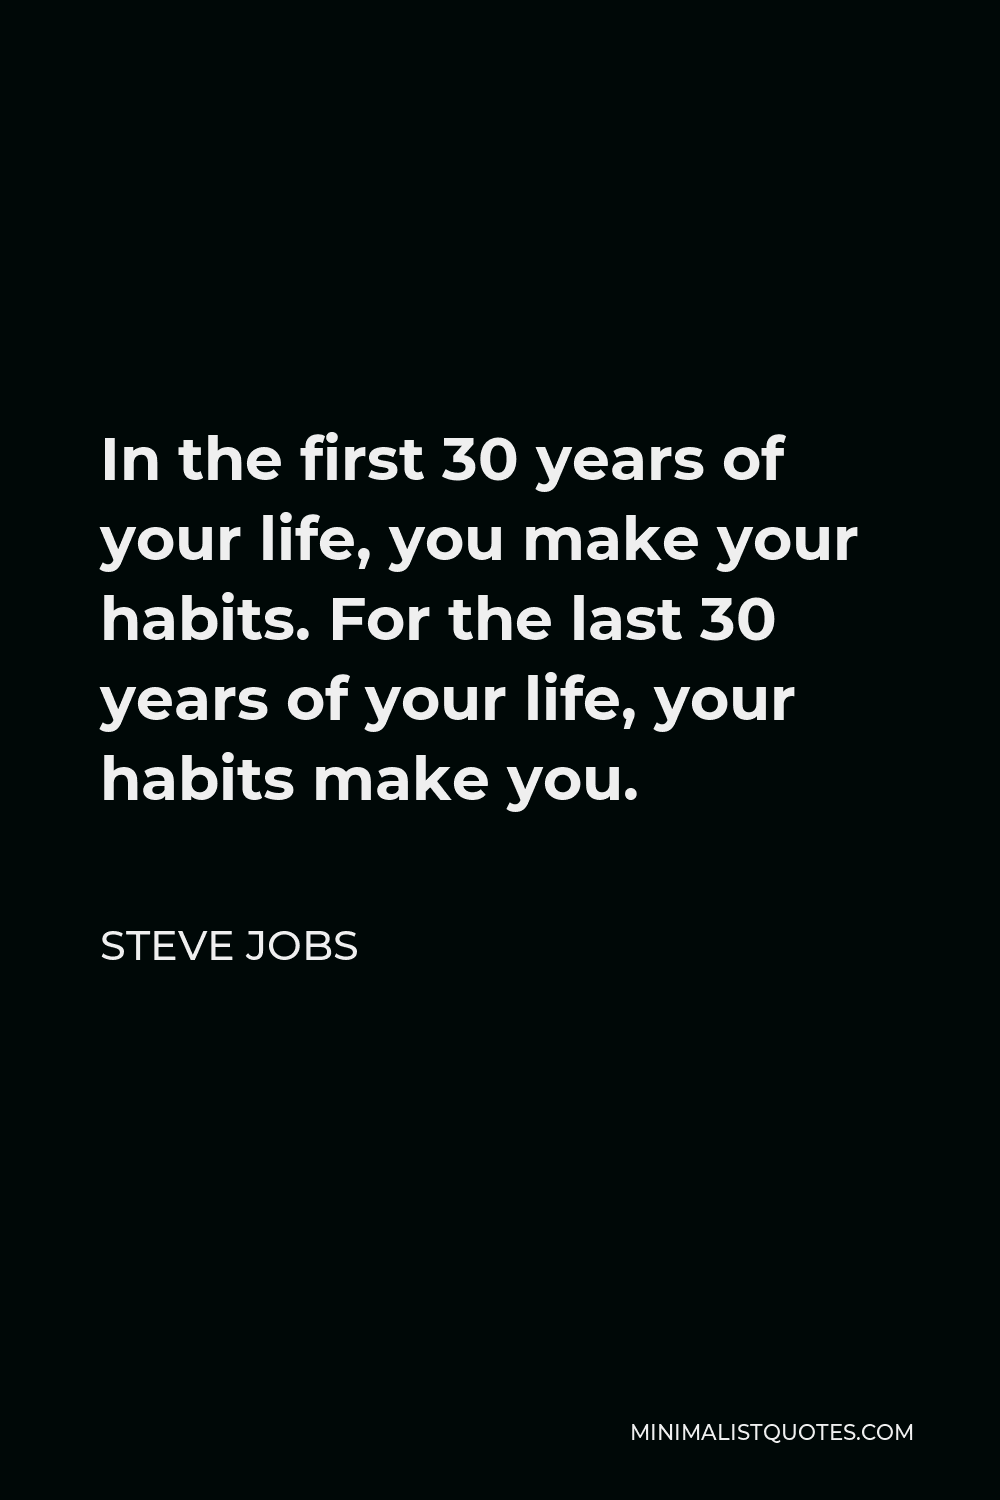 Steve Jobs Quote - In the first 30 years of your life, you make your habits. For the last 30 years of your life, your habits make you.